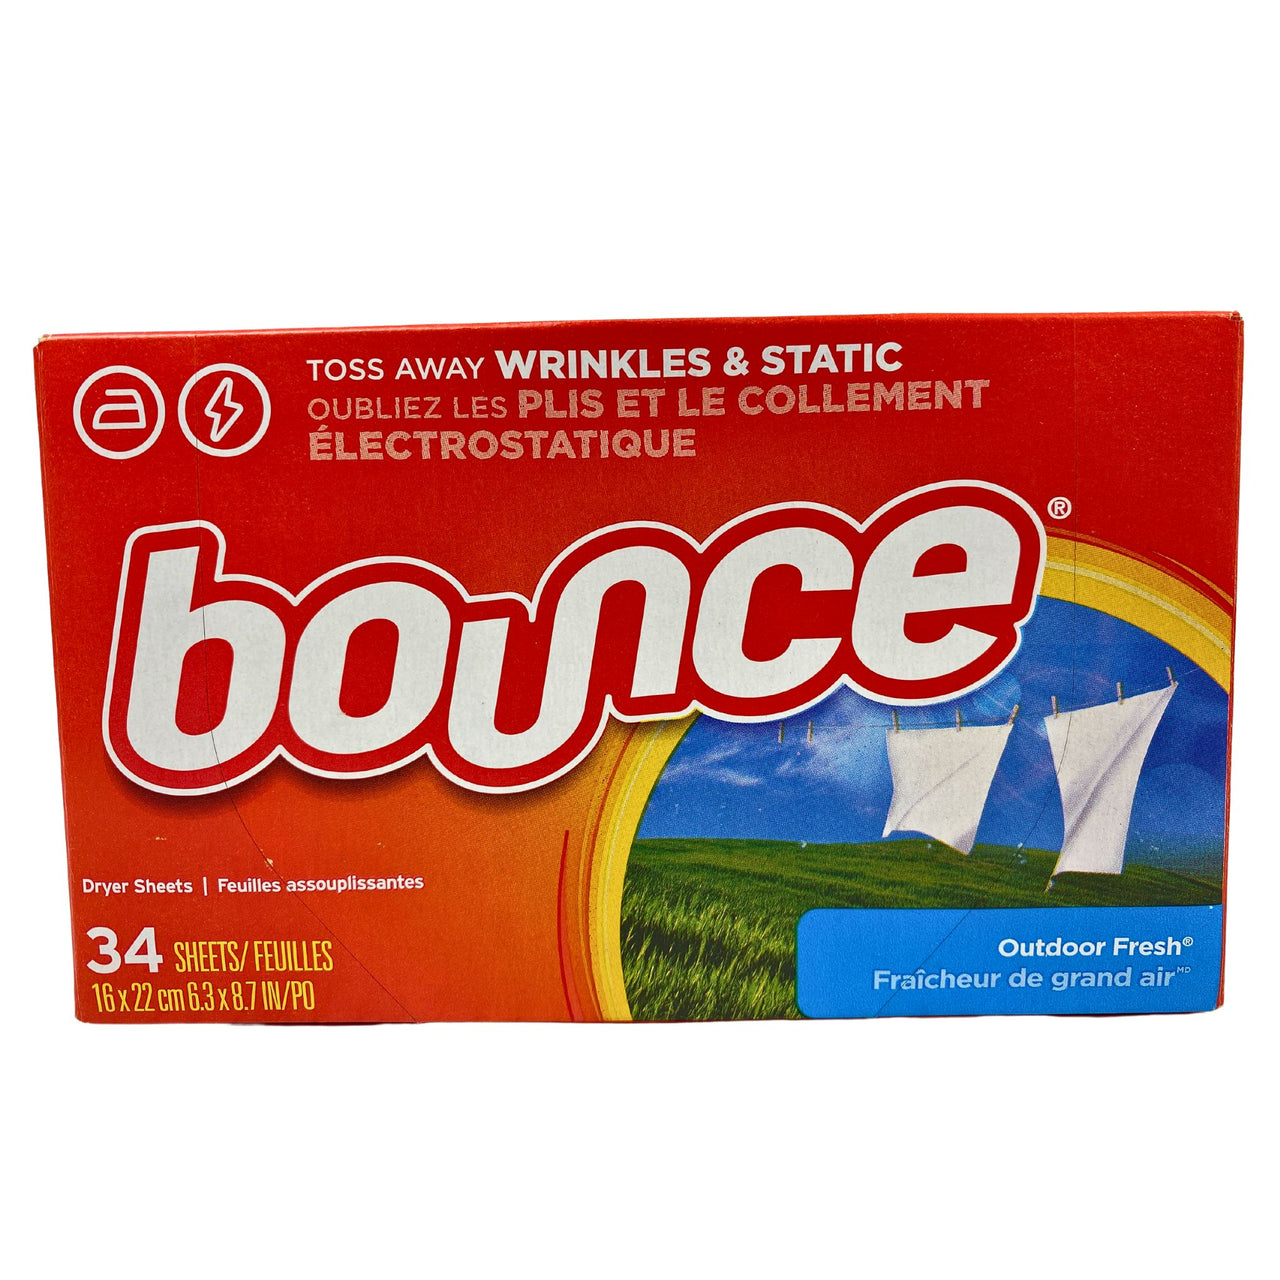 Bounce Toss Away Wrinkles & Static Outdoor Fresh 34 dryer sheets 